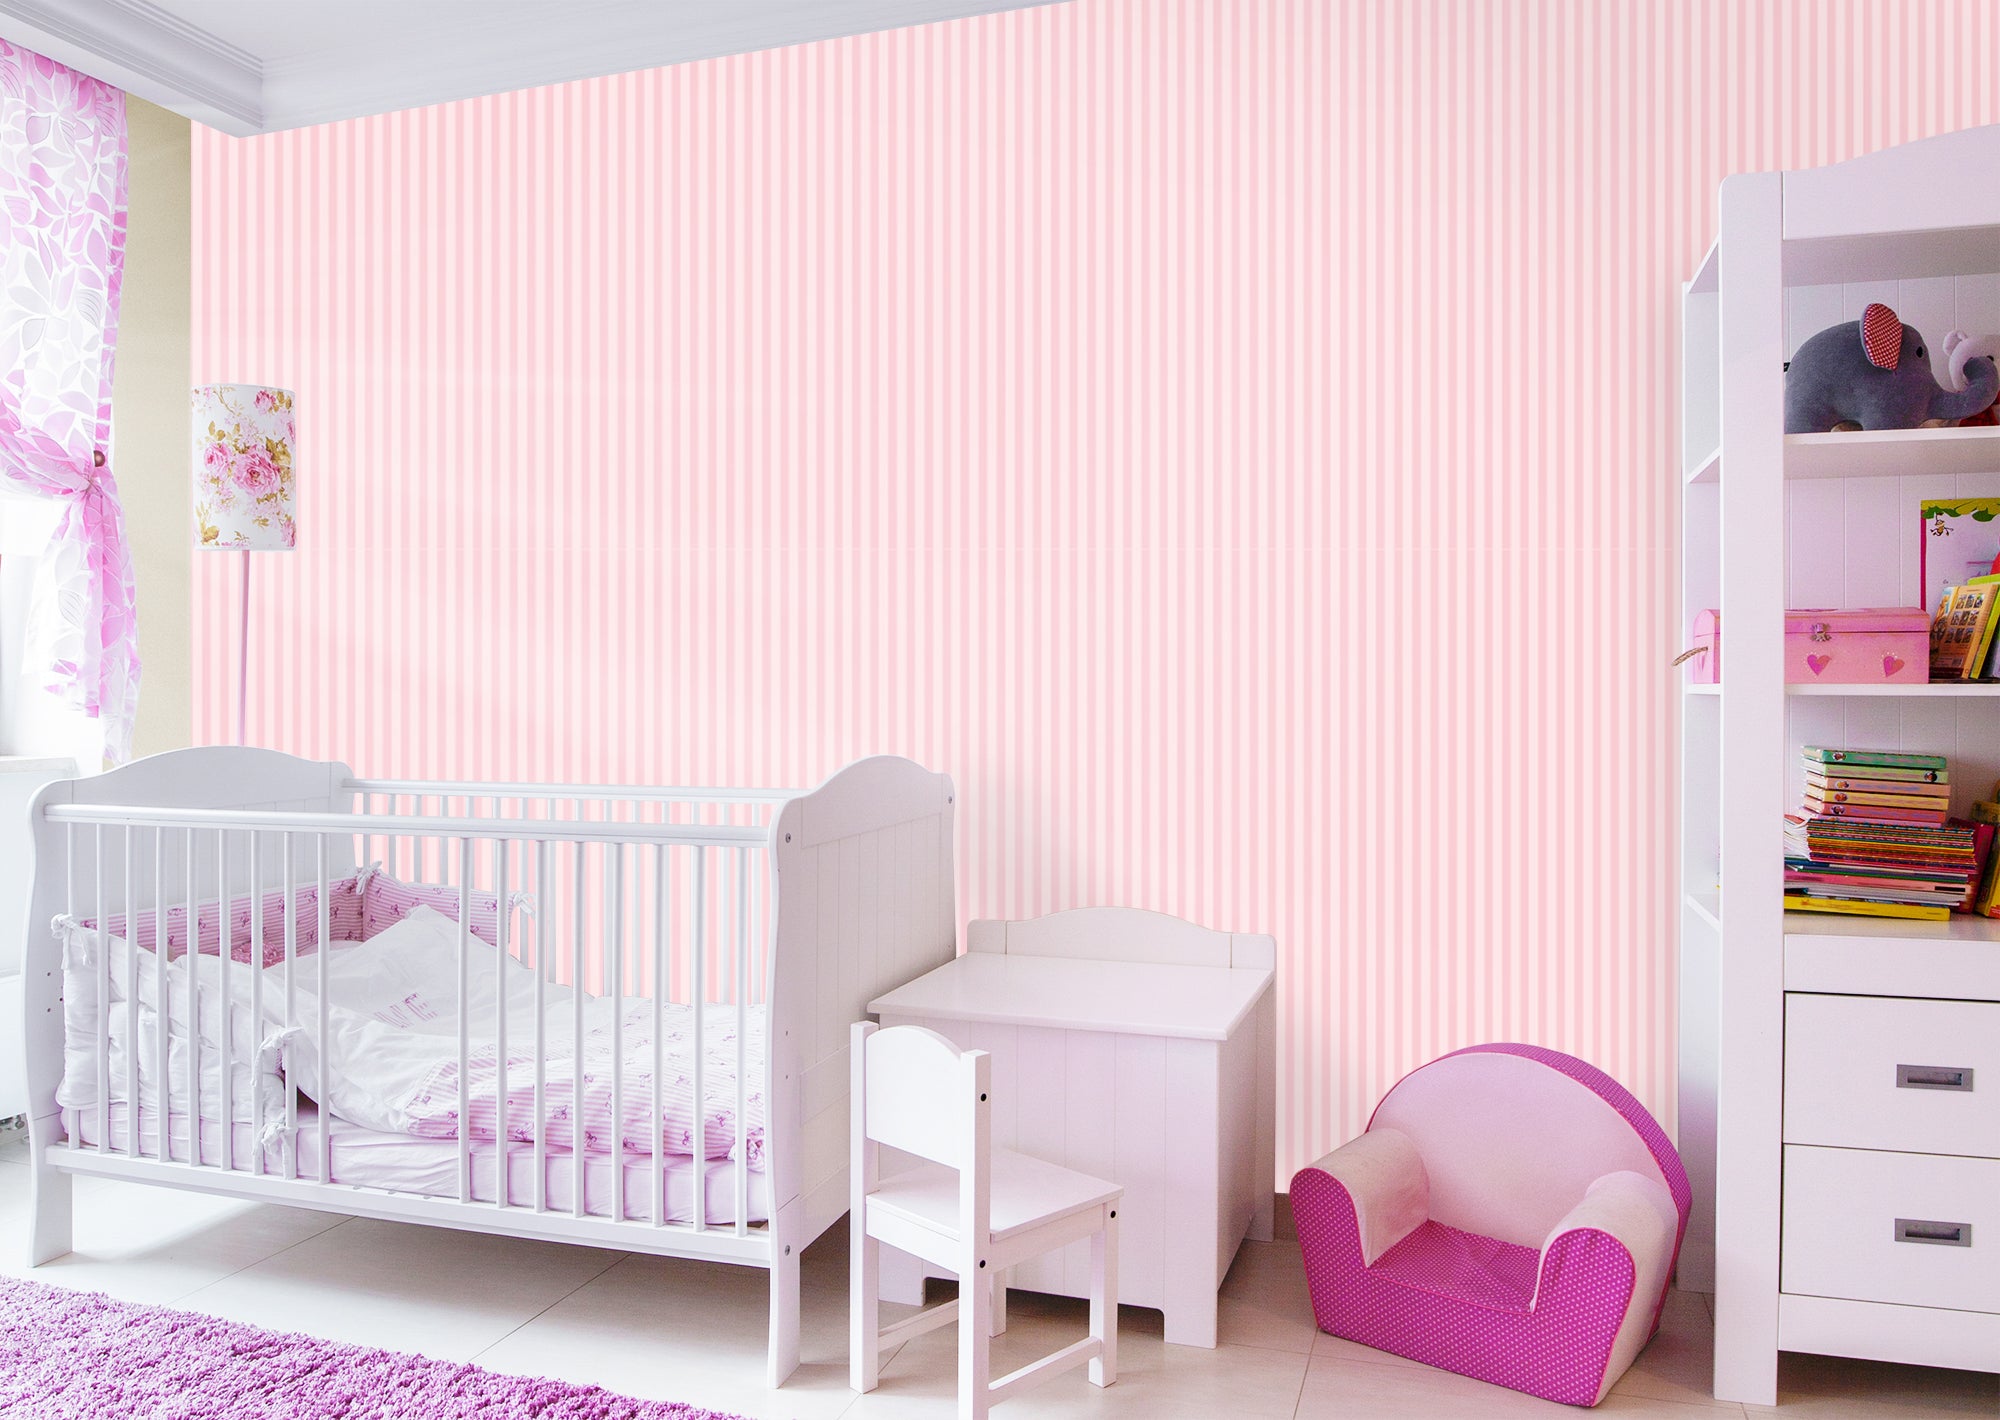 Dont Pink Twice About It - Removable Peel & Stick Wallpaper 24" x 10.5 (21 sf) by Fathead